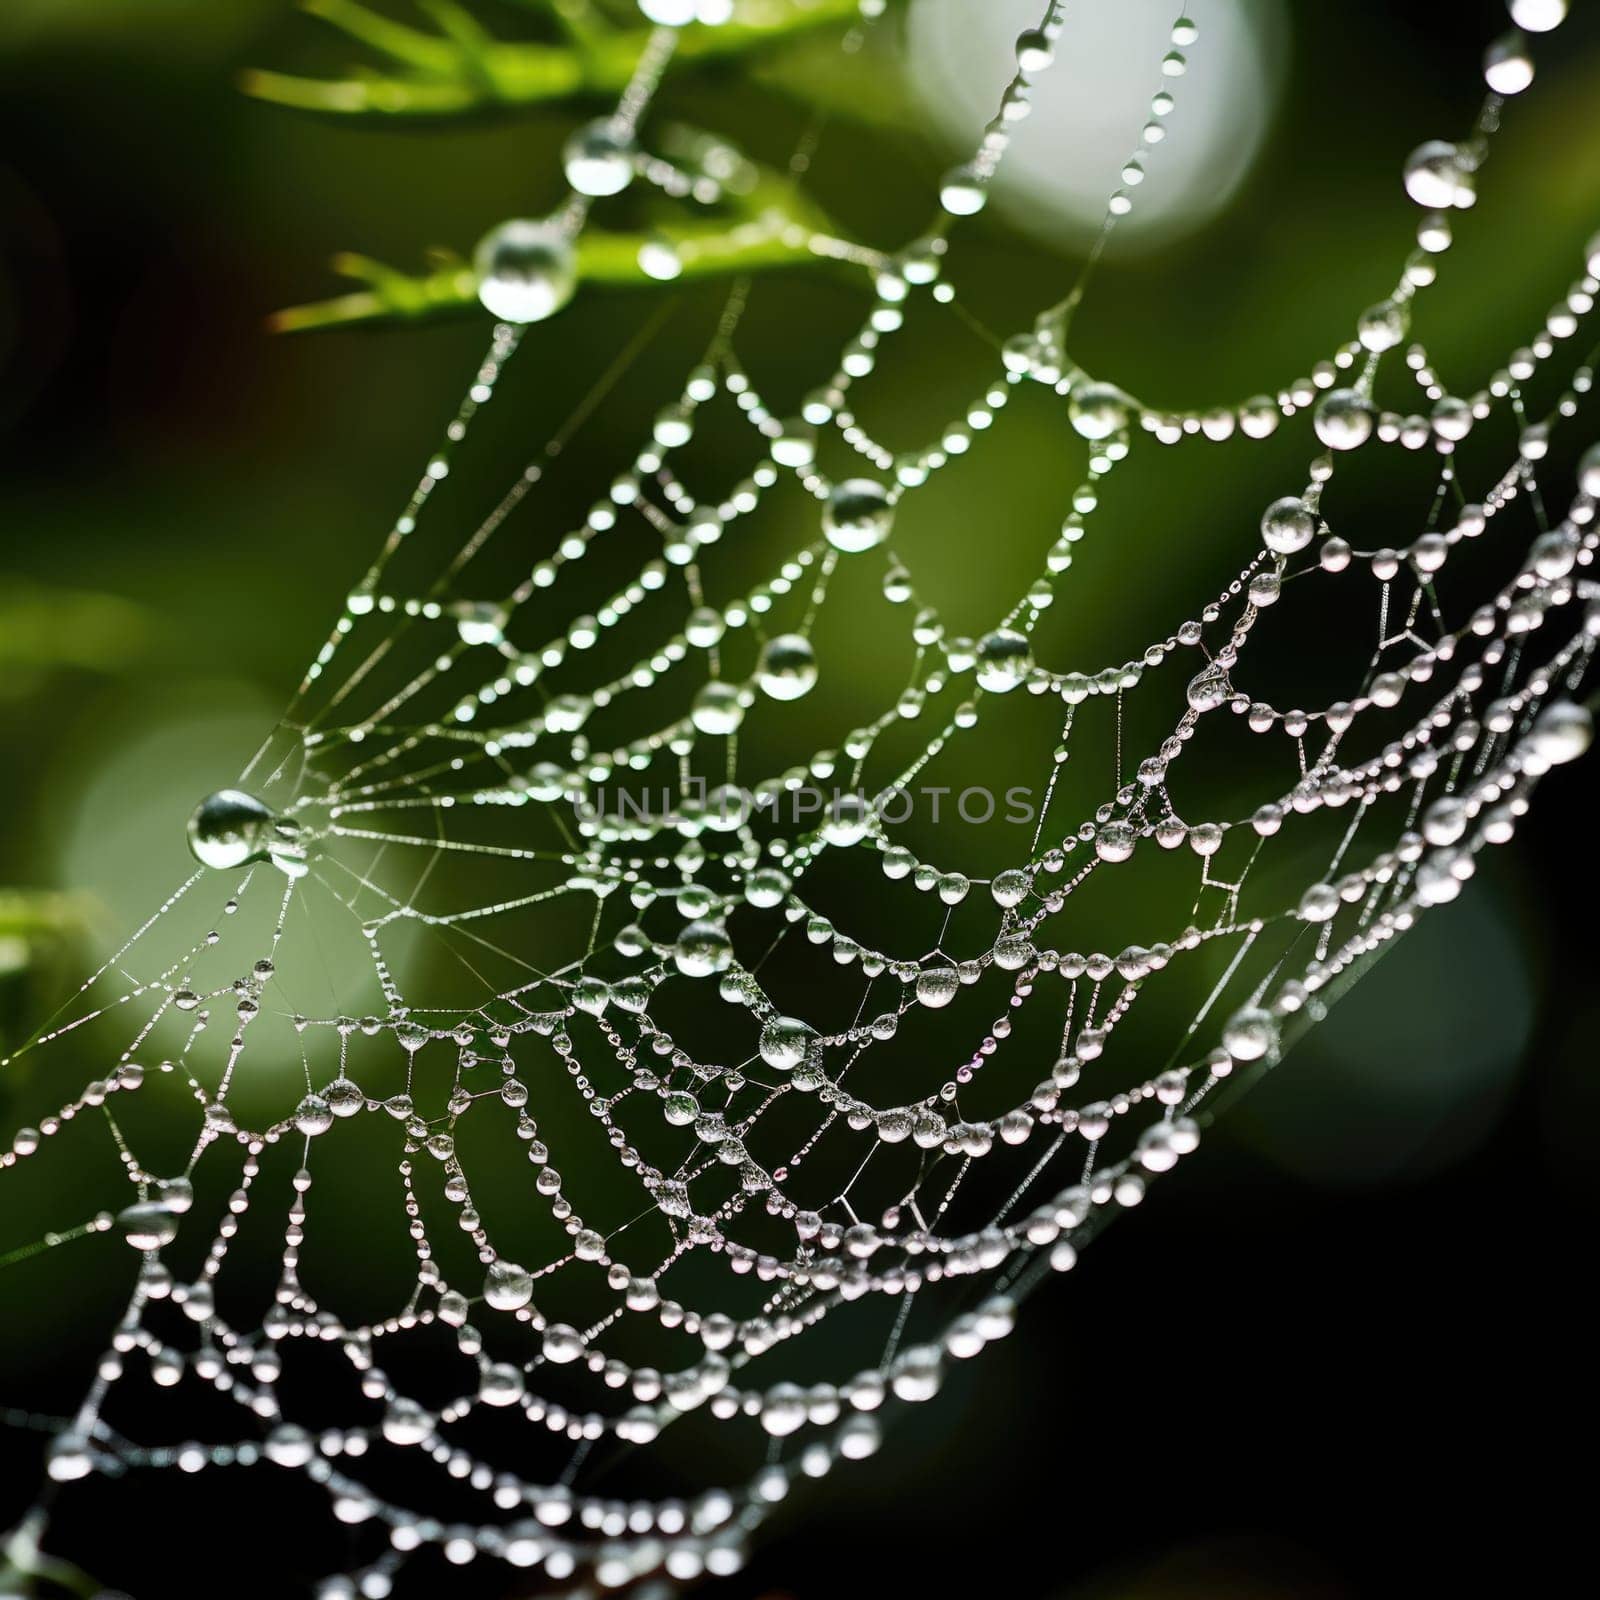 A spider web with water droplets on it, AI by starush